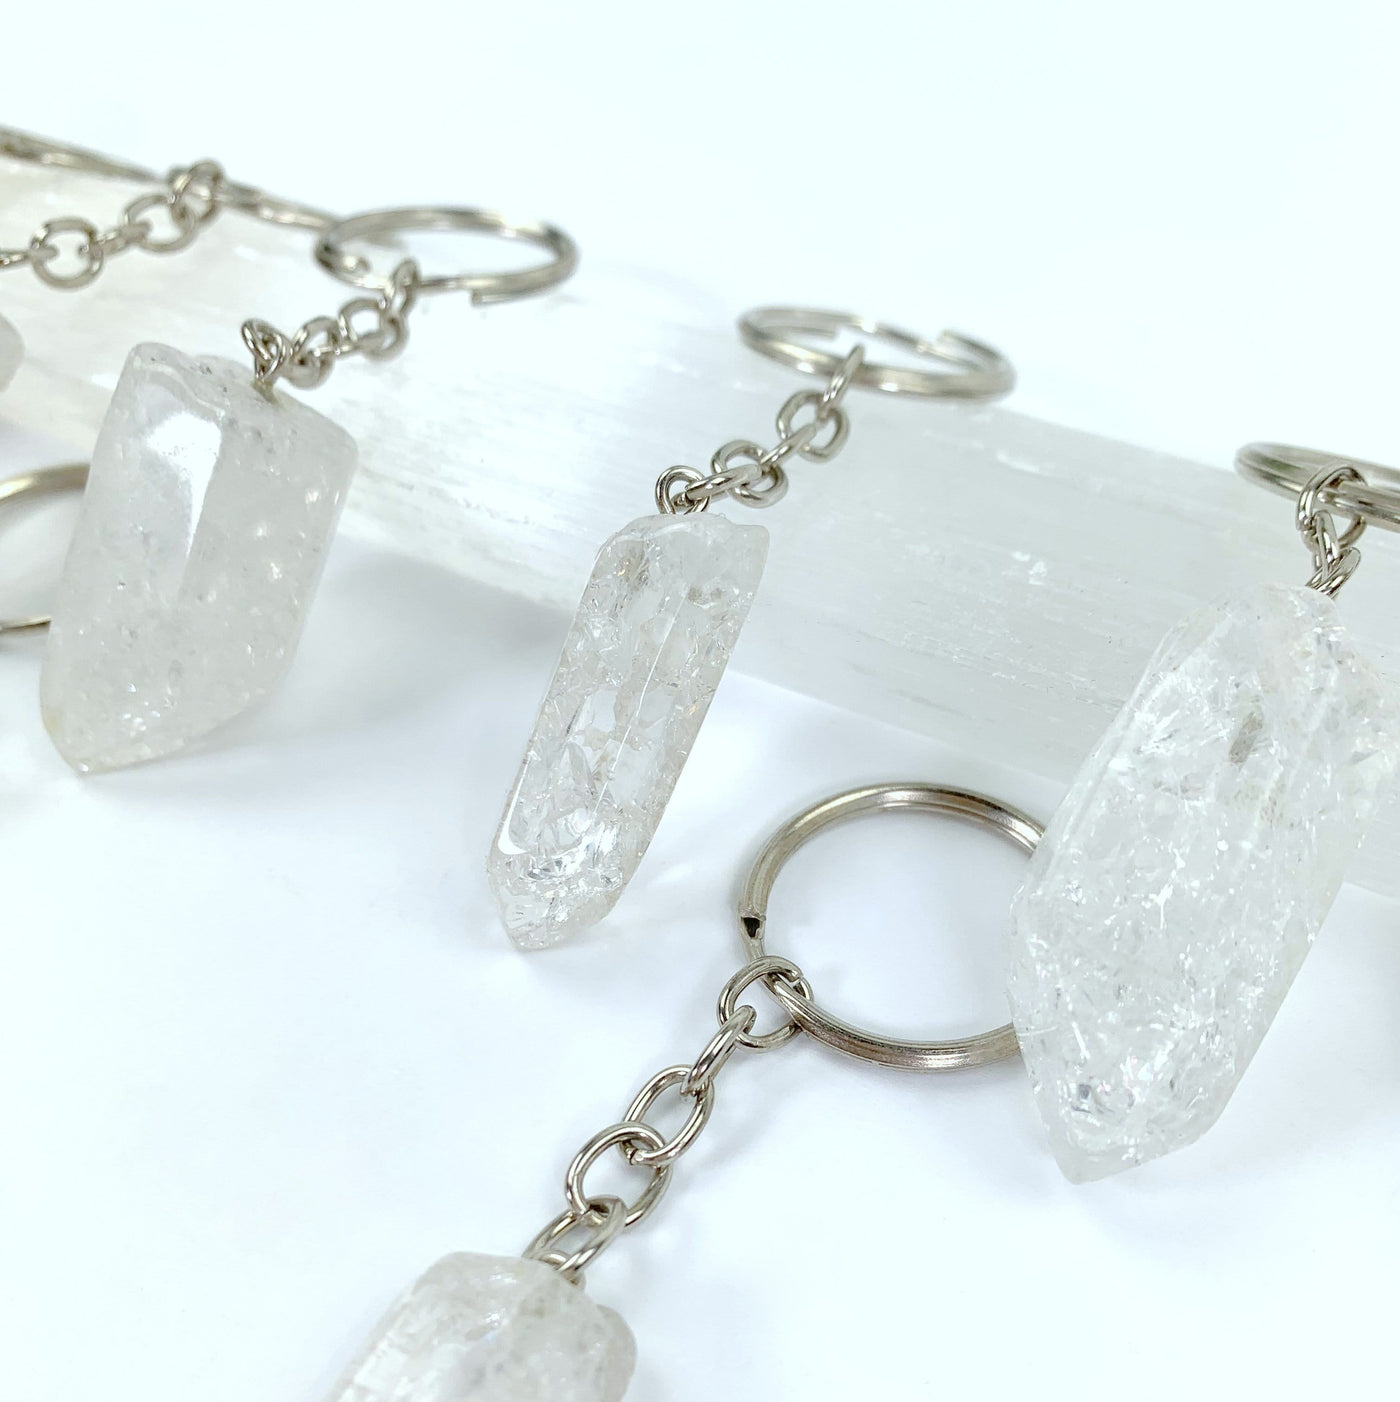 Crackle Quartz Keychains from a side angle to see thickness